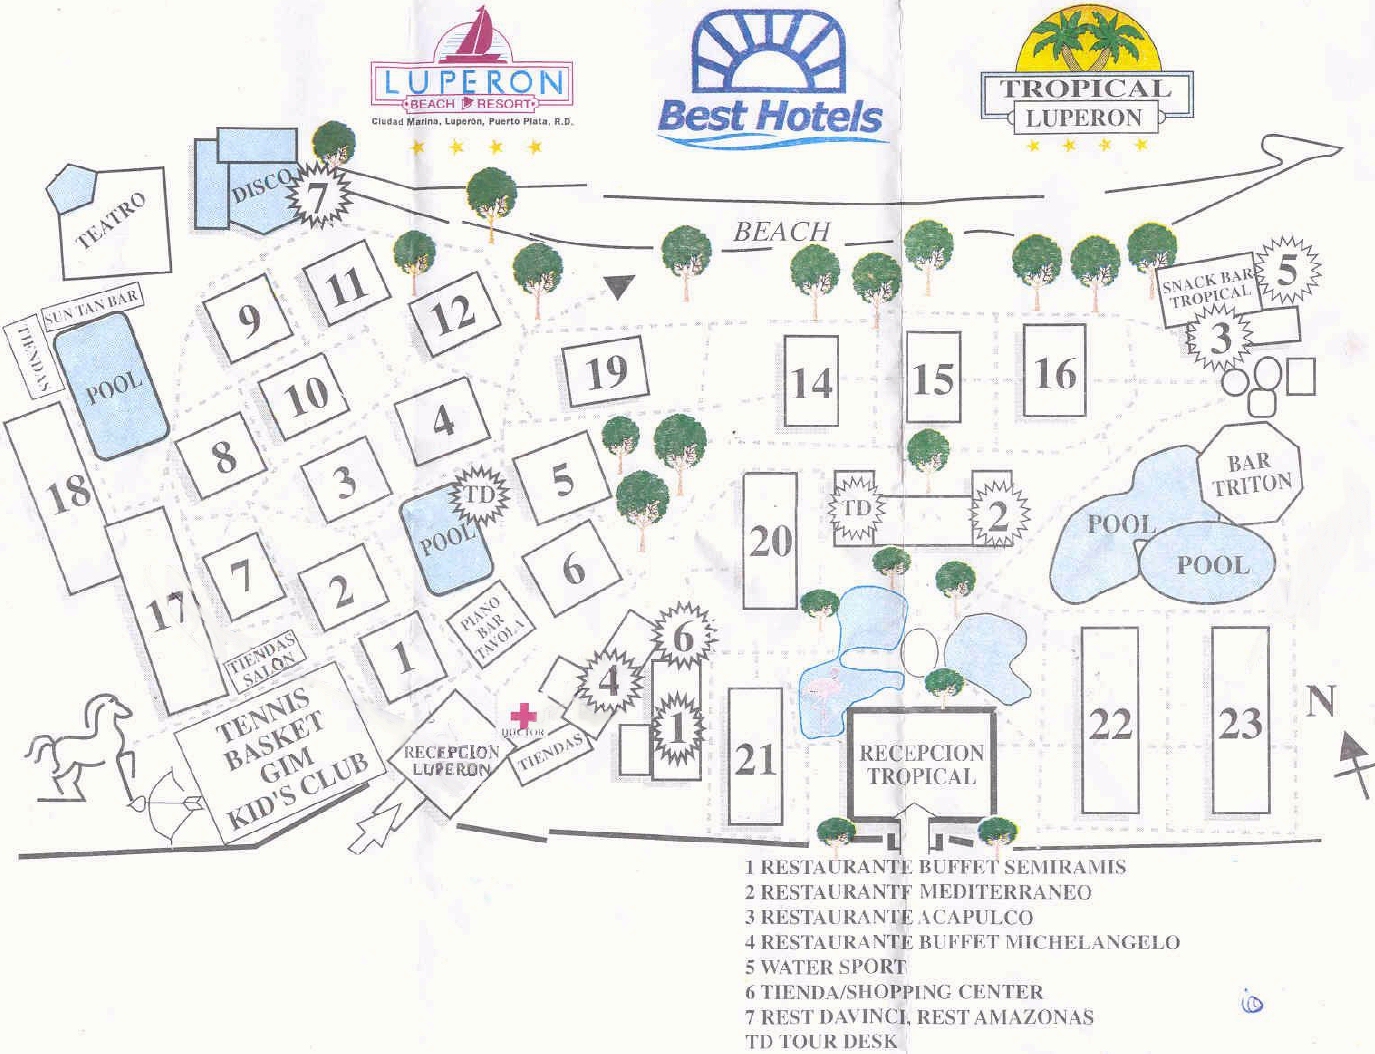 Property Map for the Luperon Beach Resort.